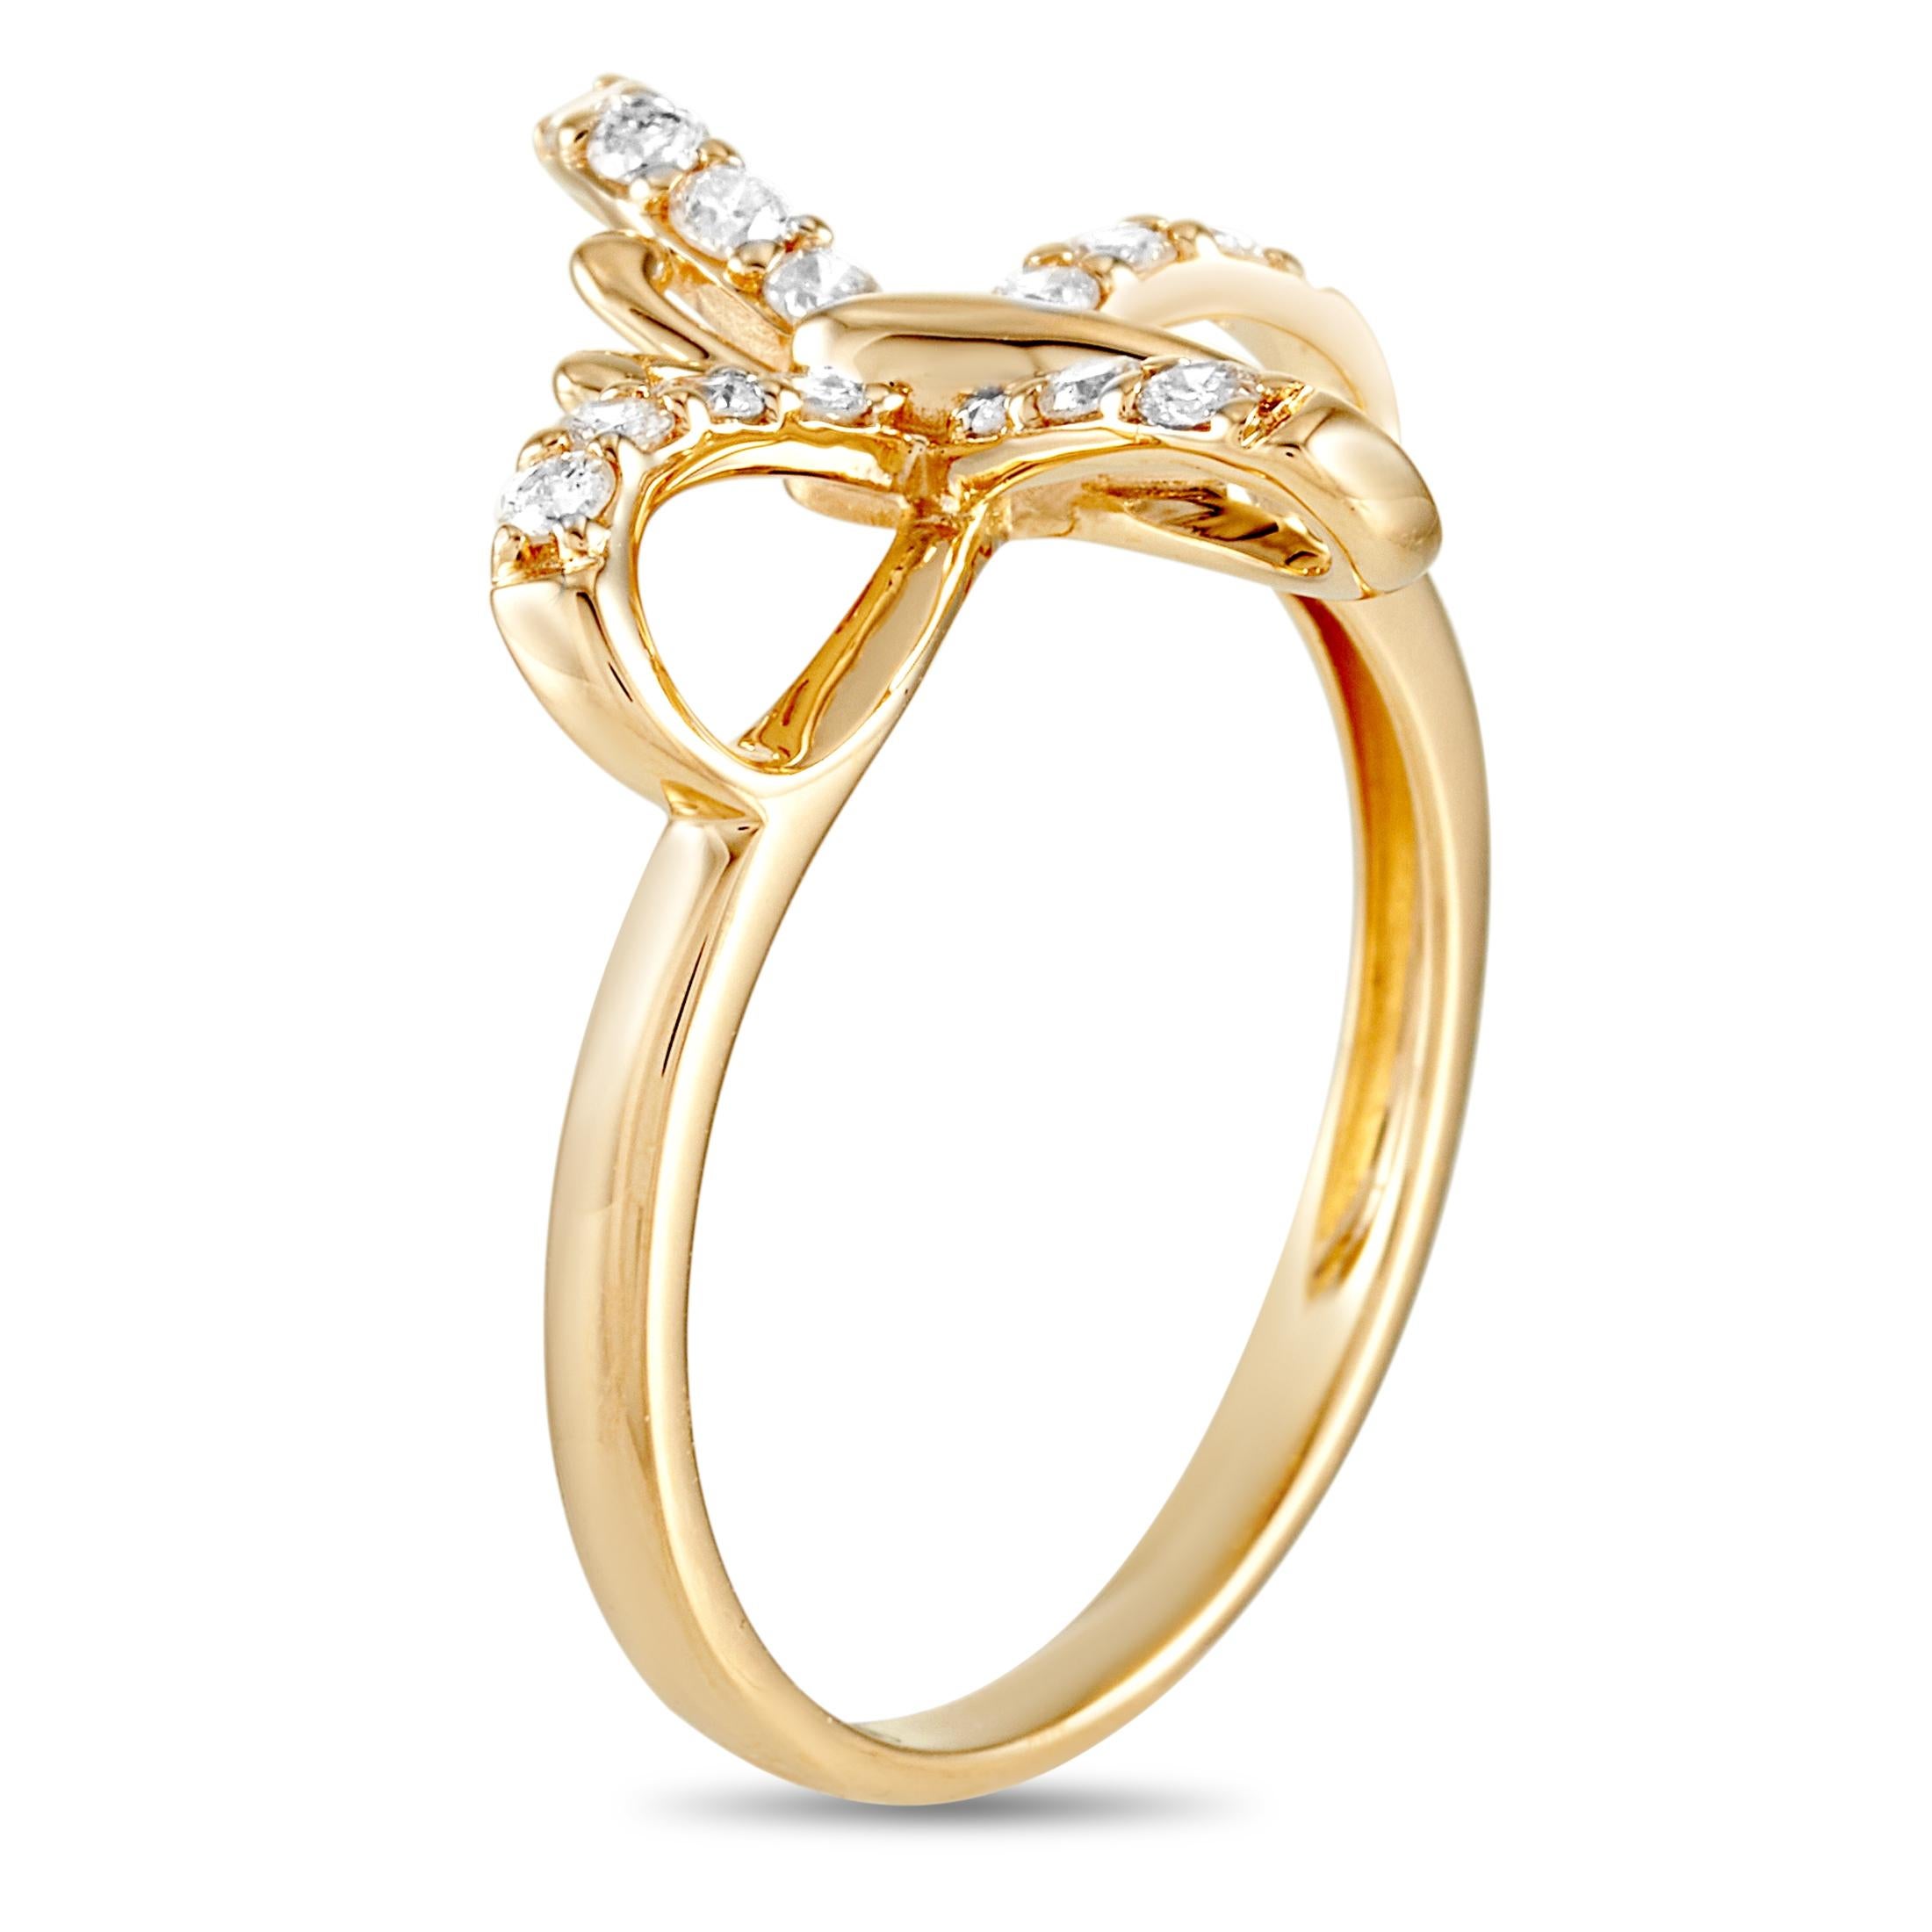 This LB Exclusive butterfly ring is made of 14K yellow gold and embellished with diamonds that amount to 0.30 carats. The ring weighs 2.5 grams and boasts band thickness of 2 mm and top height of 3 mm, while top dimensions measure 16 by 17 mm.
 
